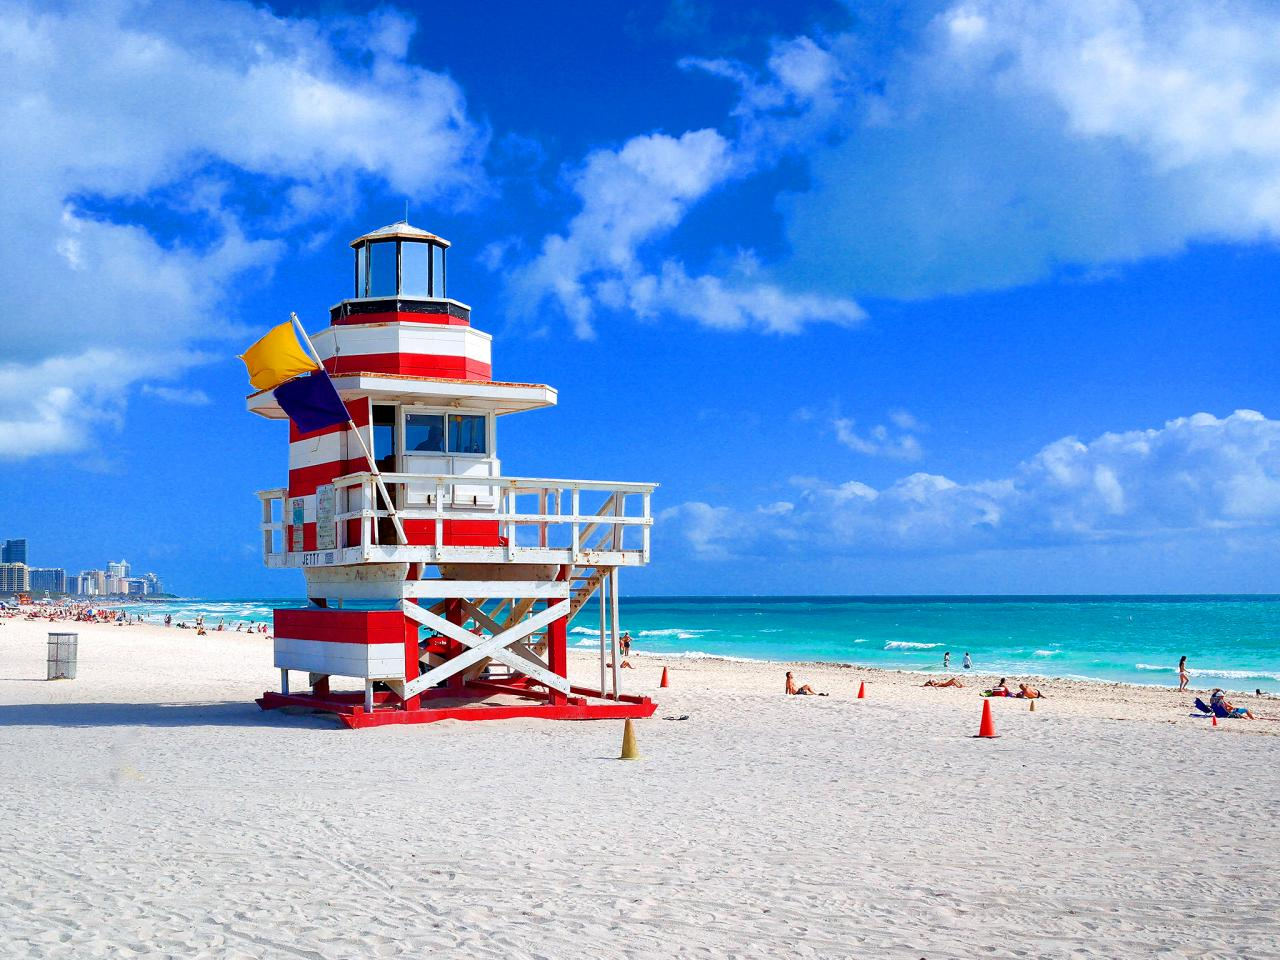 How to Spend One Day in South Beach, Miami